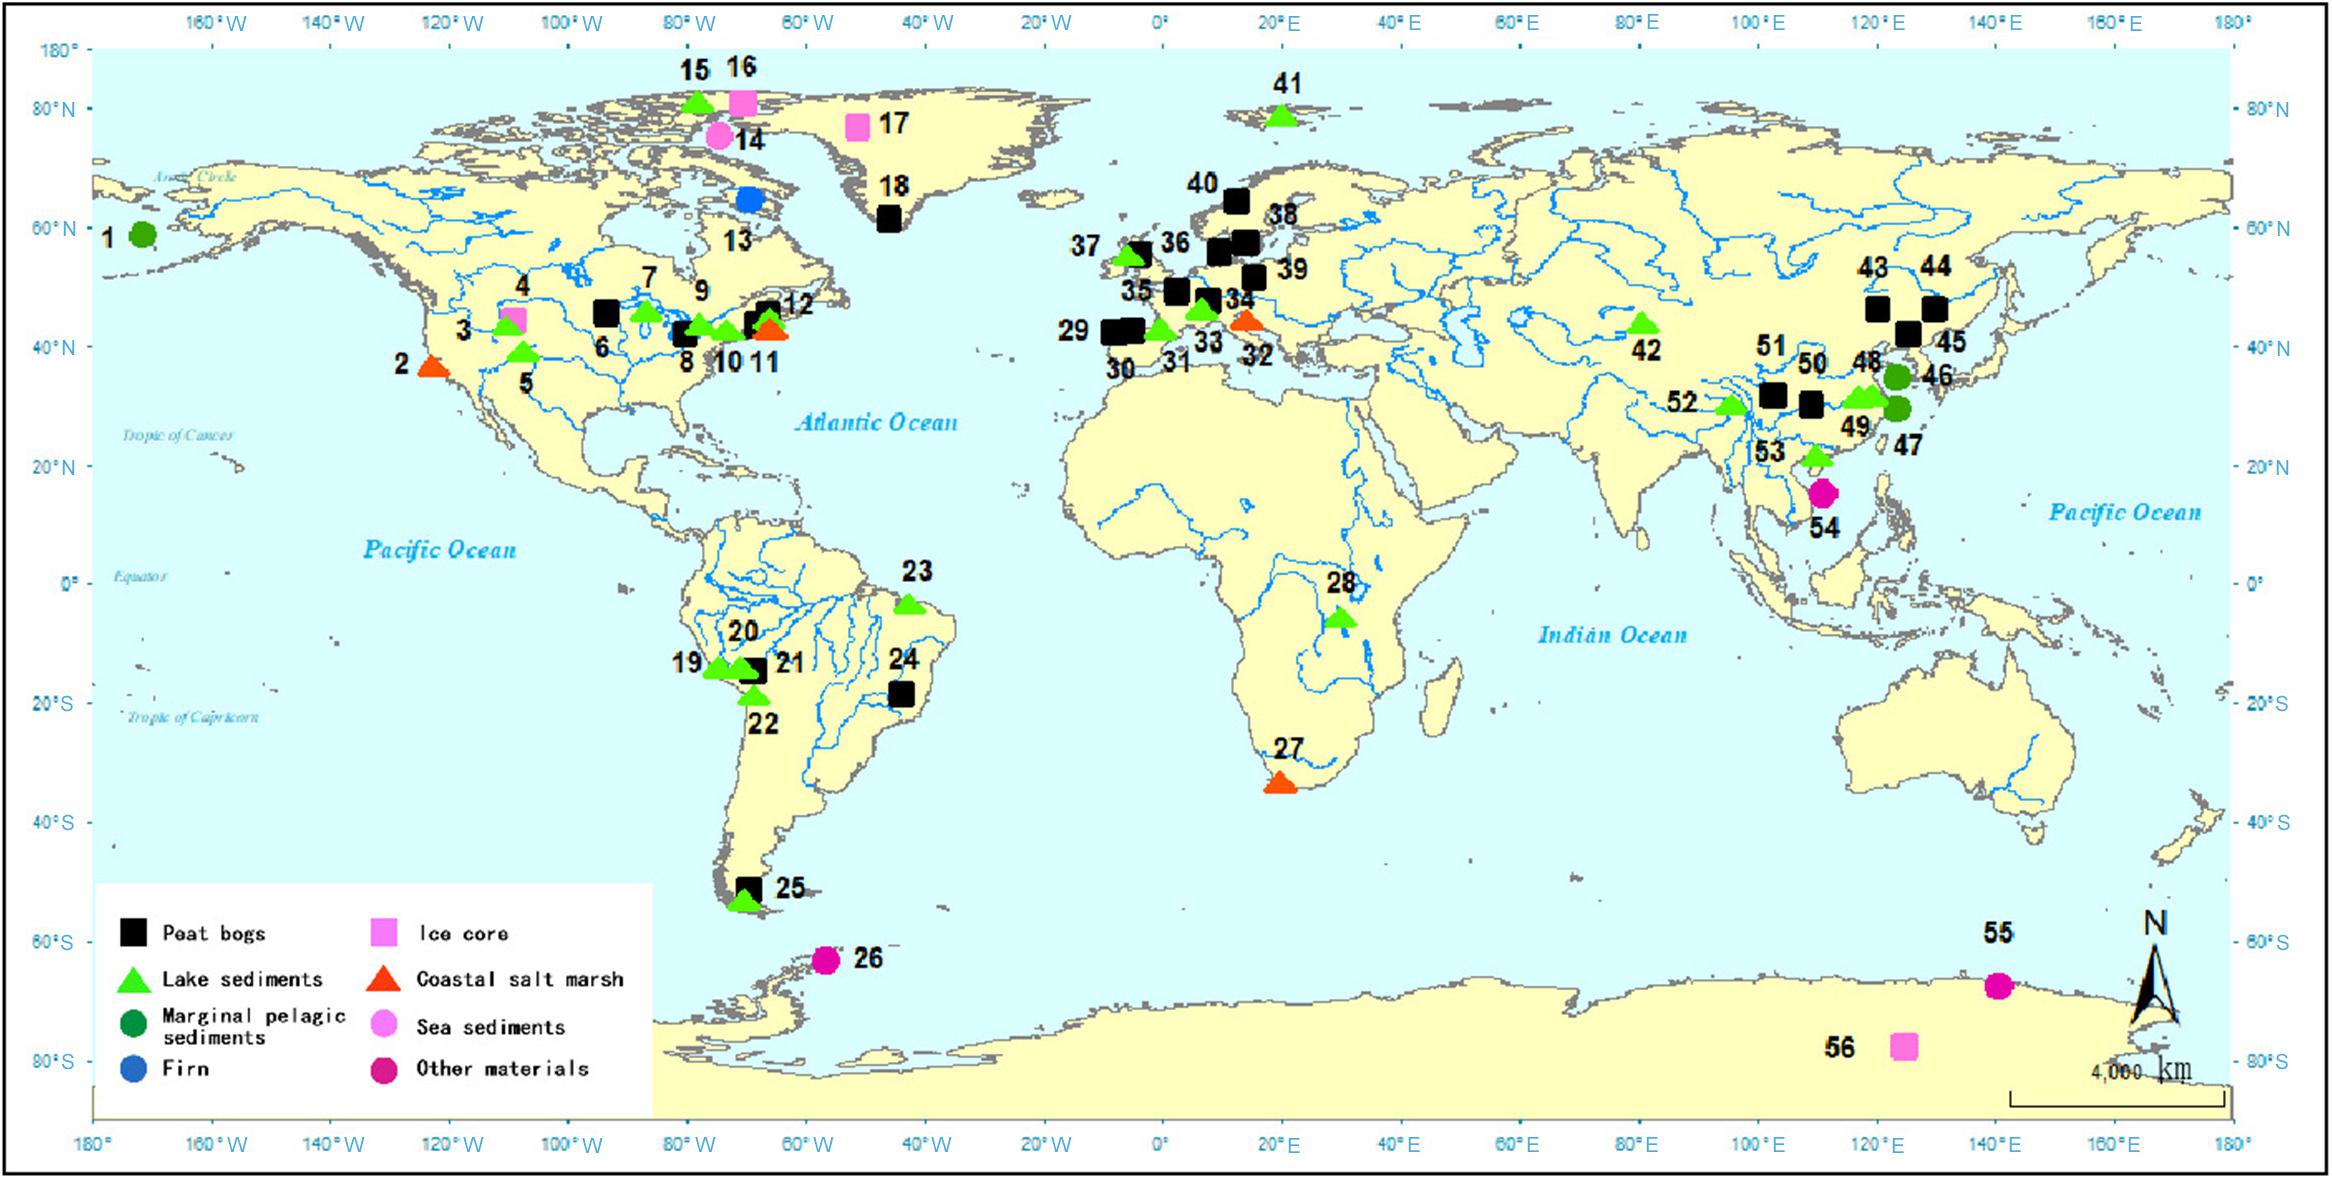 Frontiers Mercury Deposition Climate Change And Anthropogenic Activities A Review Earth Science